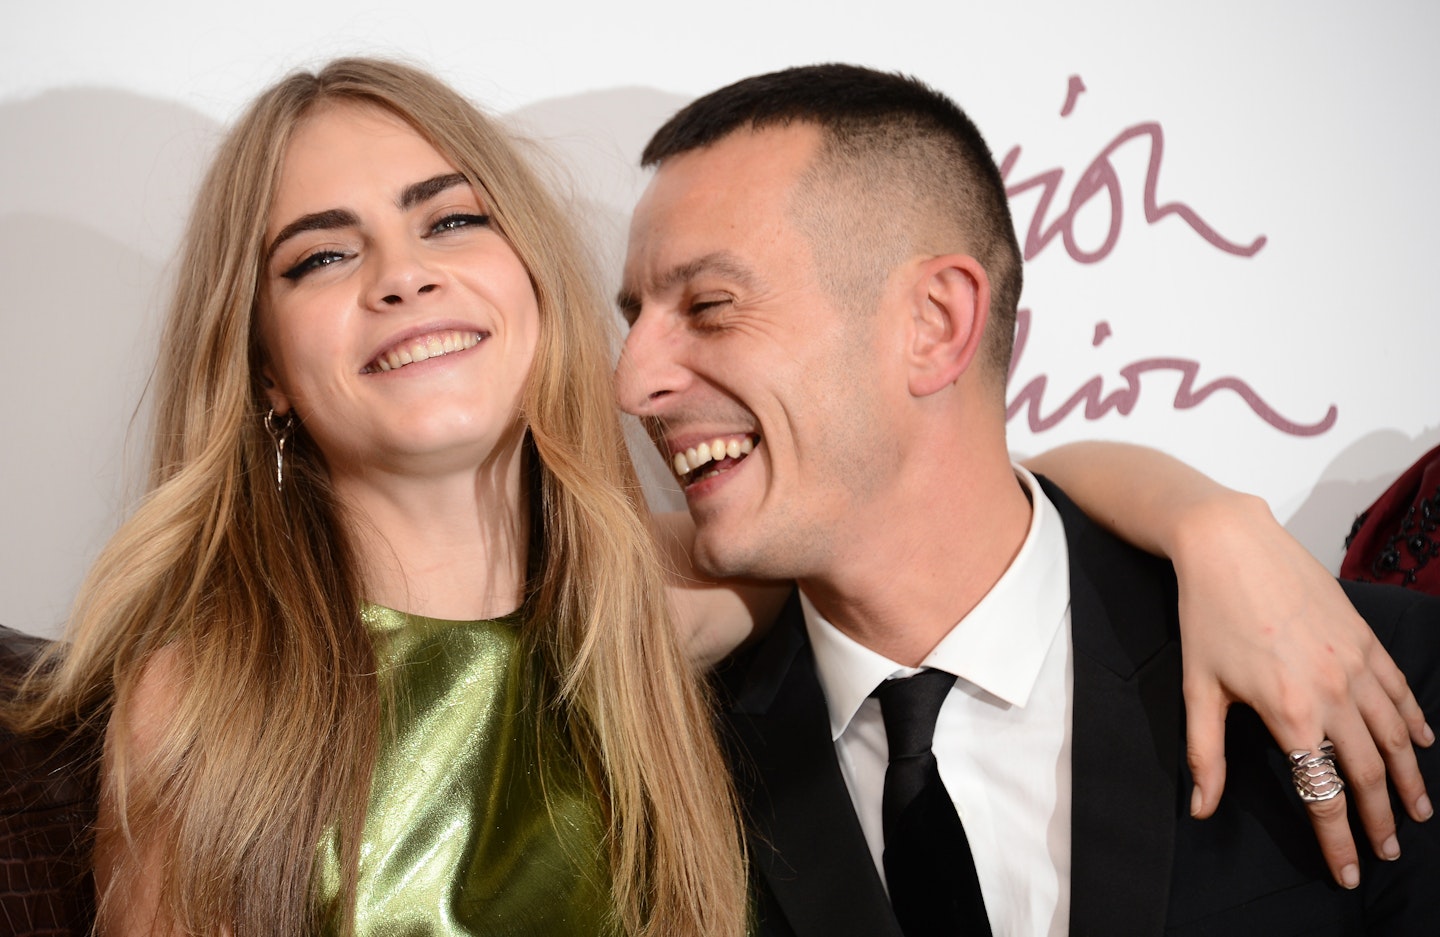 Jonathan Saunders with Cara Delevingne [Getty]